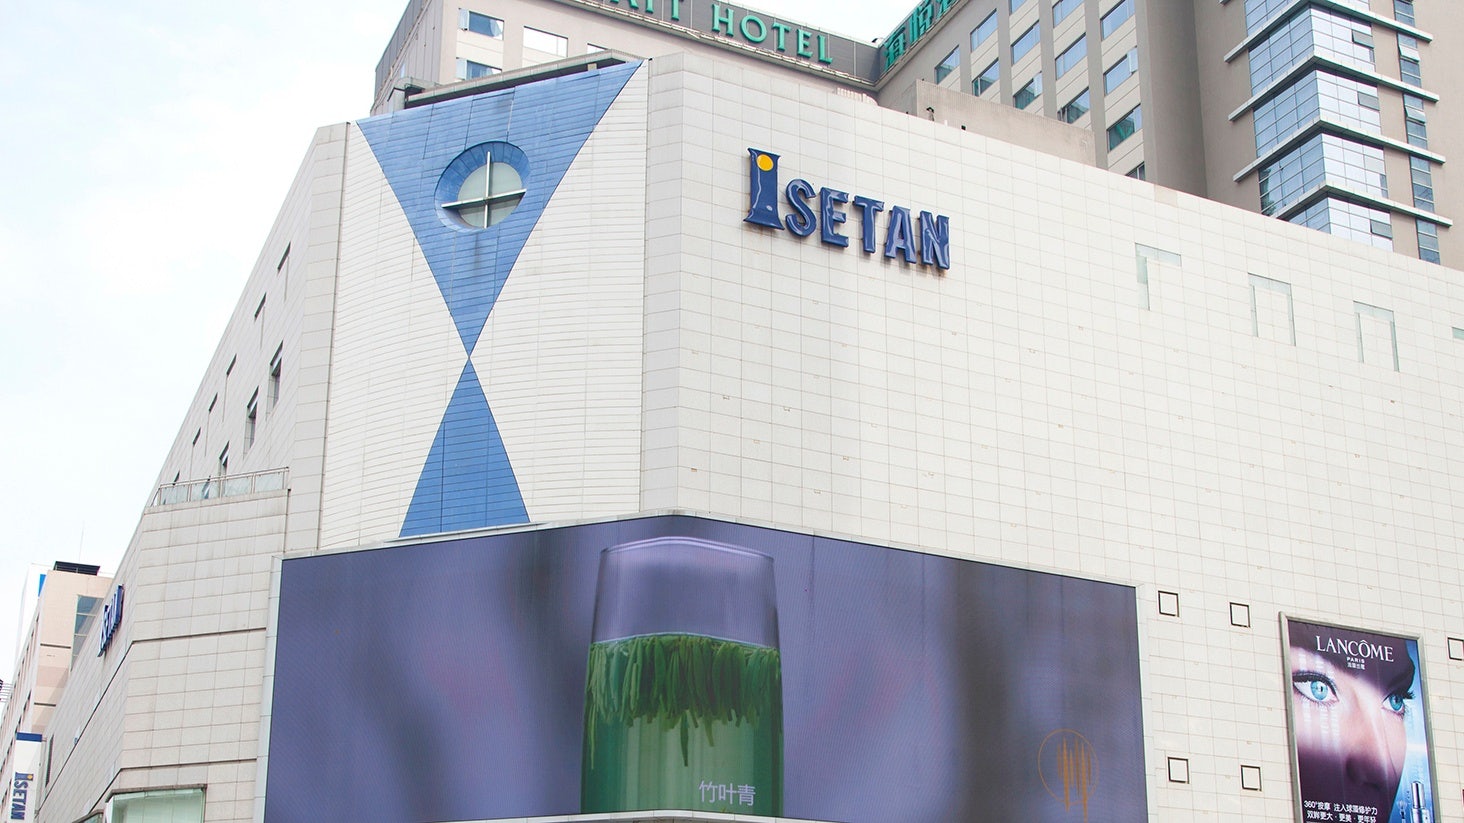 Isetan, formerly known as one of the trendiest department stores in Asia, is closing two locations in Chengdu. Does this spell a bleak future for retailers in China? Photo: Isetan Chengdu